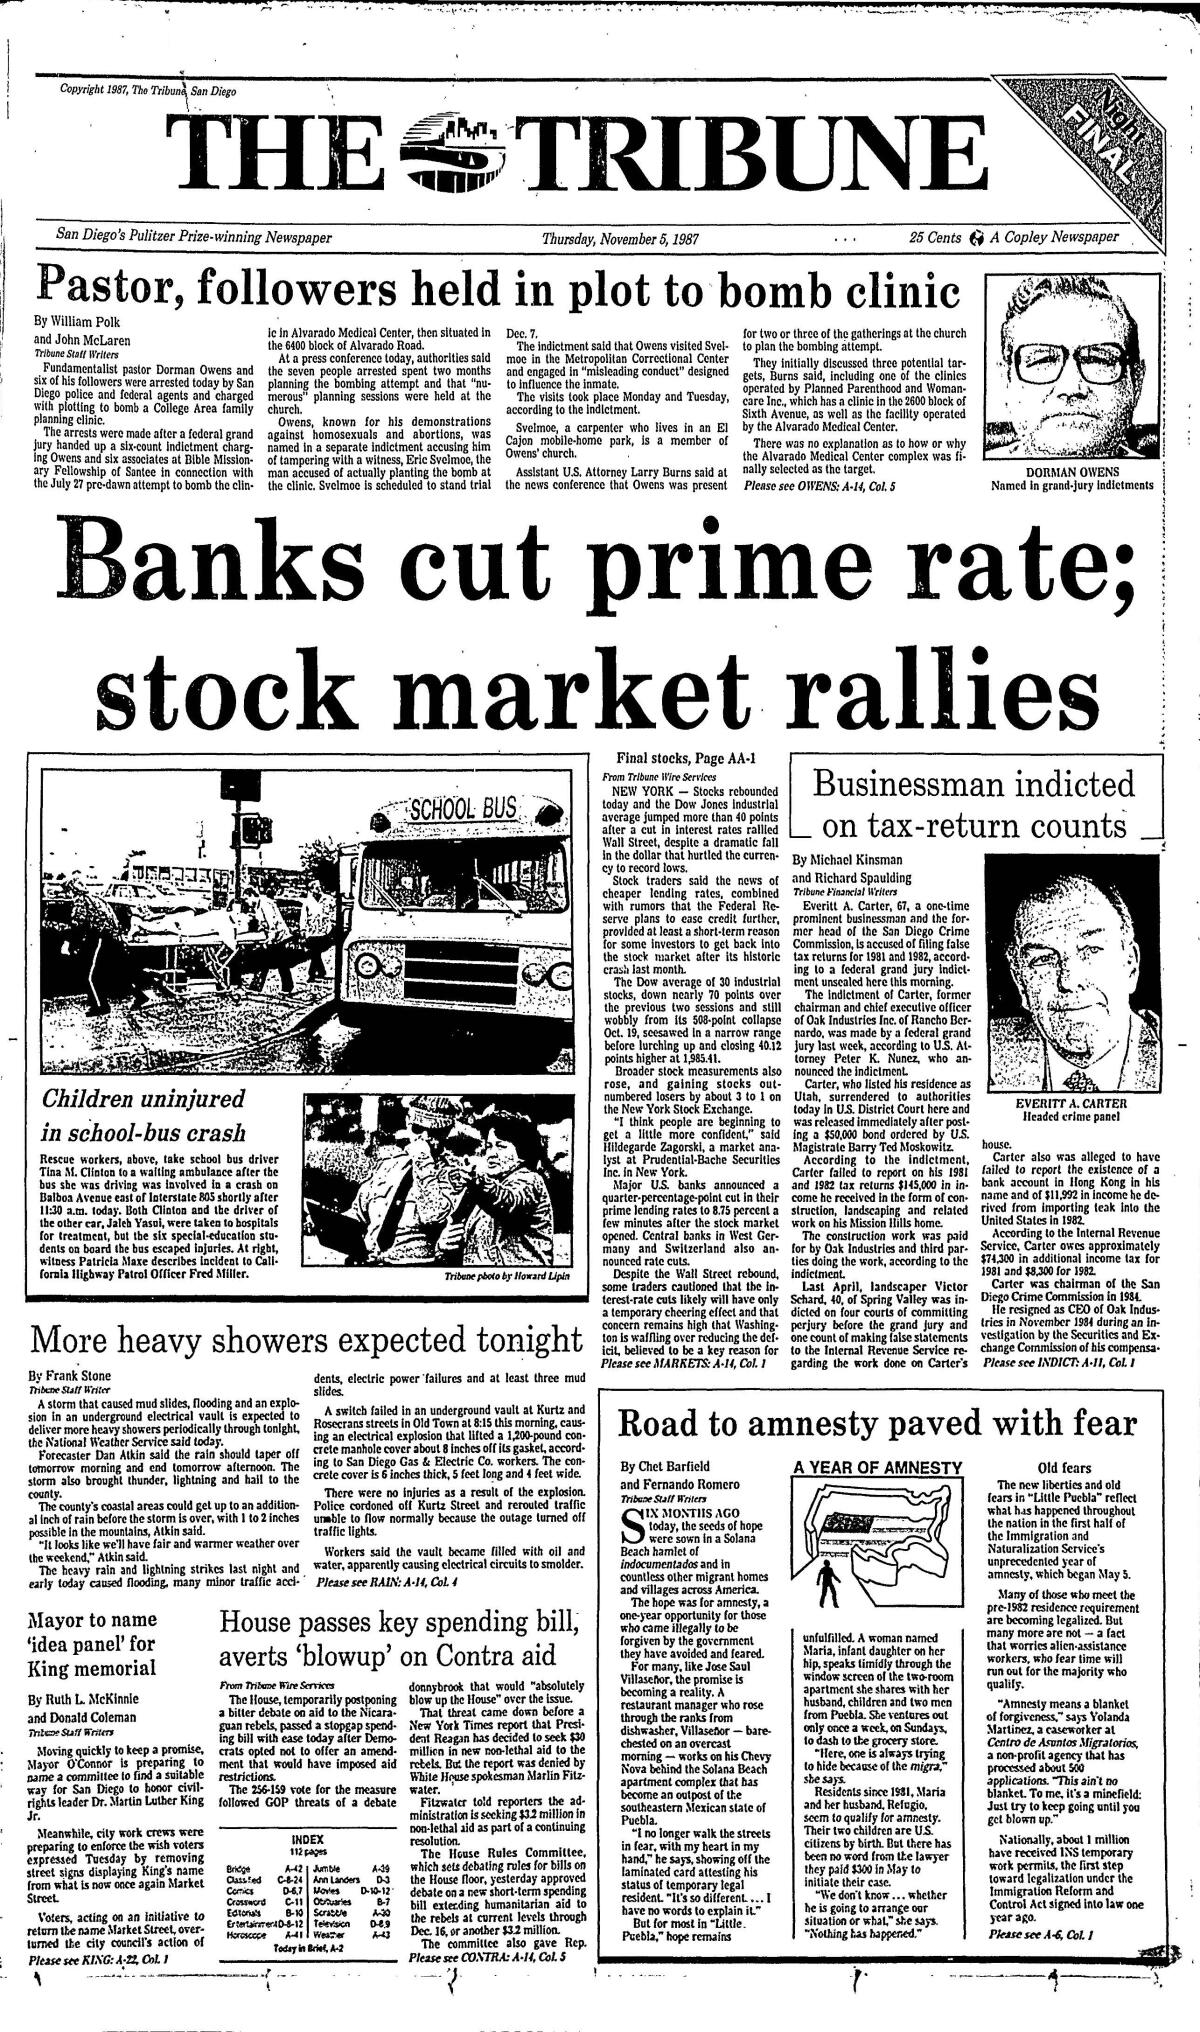 Copy of The Tribune's front page from November 5, 1987.